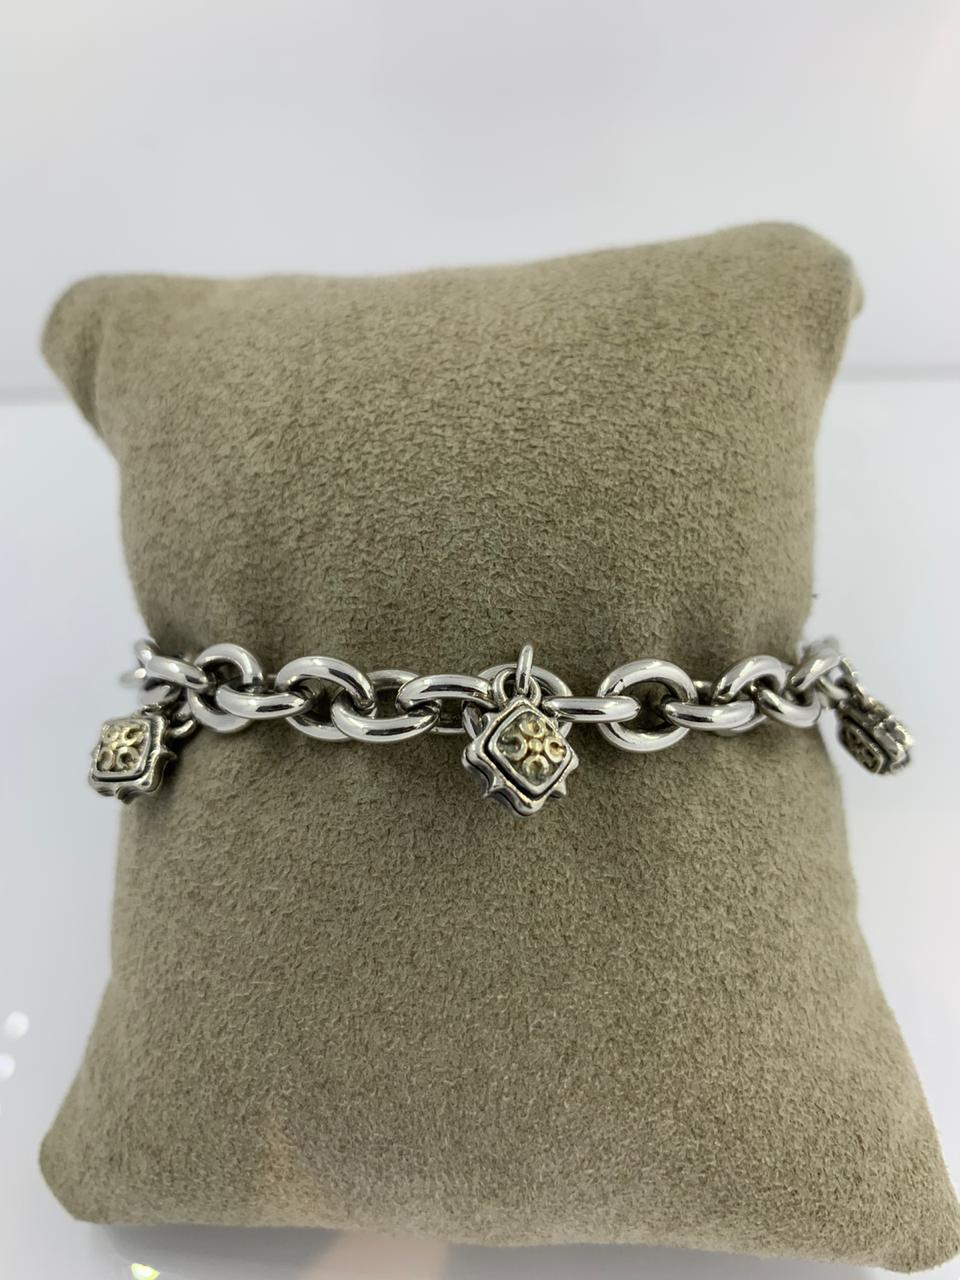 Scott Kay Silver and Gold Bracelet
1 row silver and 18kt Gold Bracelet
with charms
SKS-10232